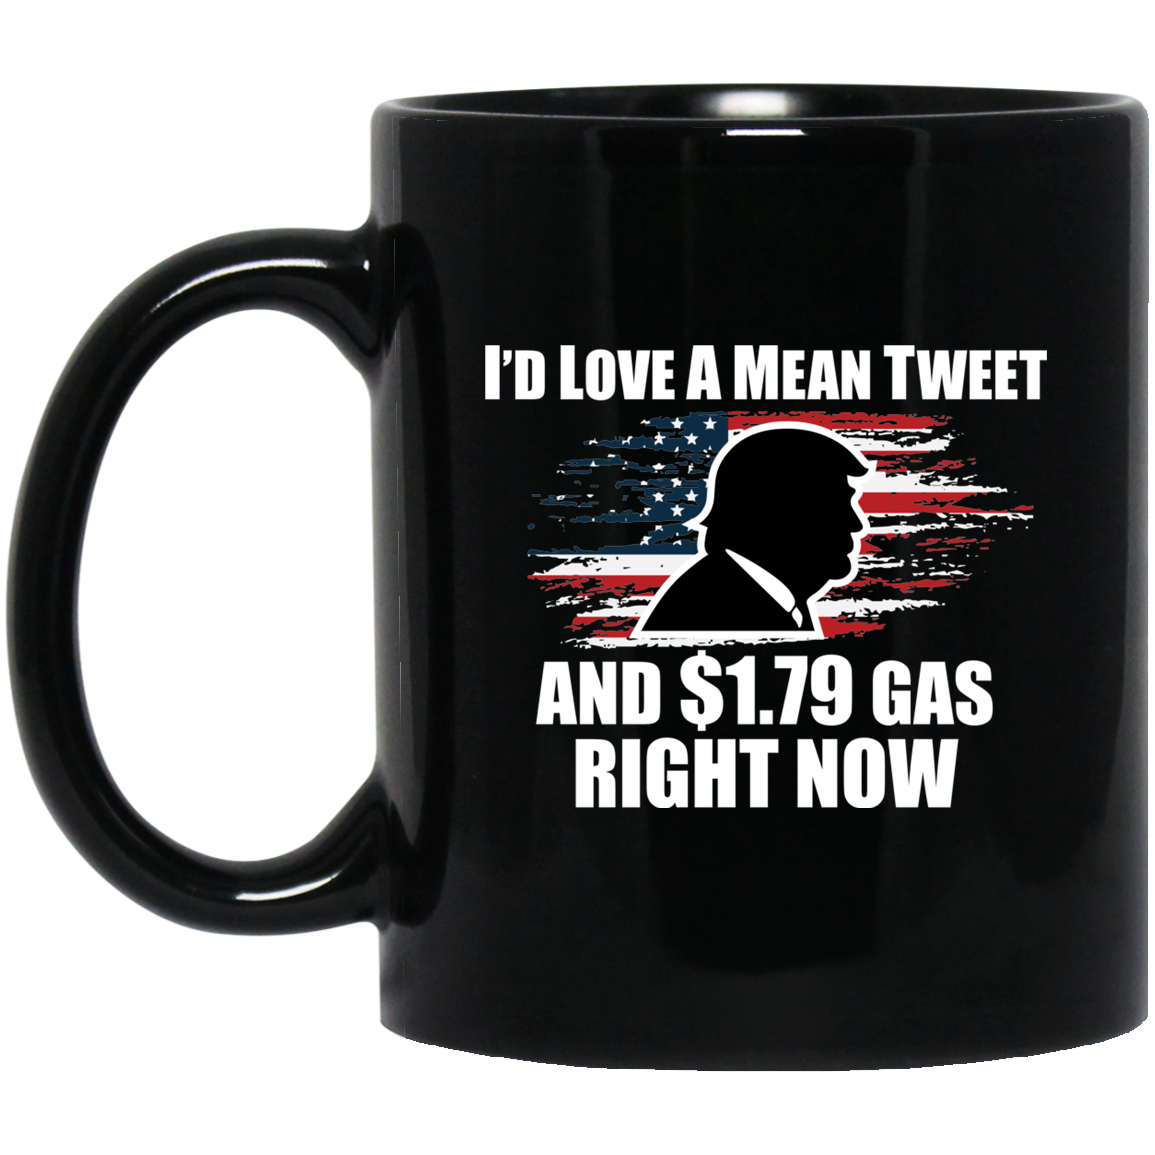 I'd Love A Mean Tweet and $1.79 Gas Right Now - MUGS